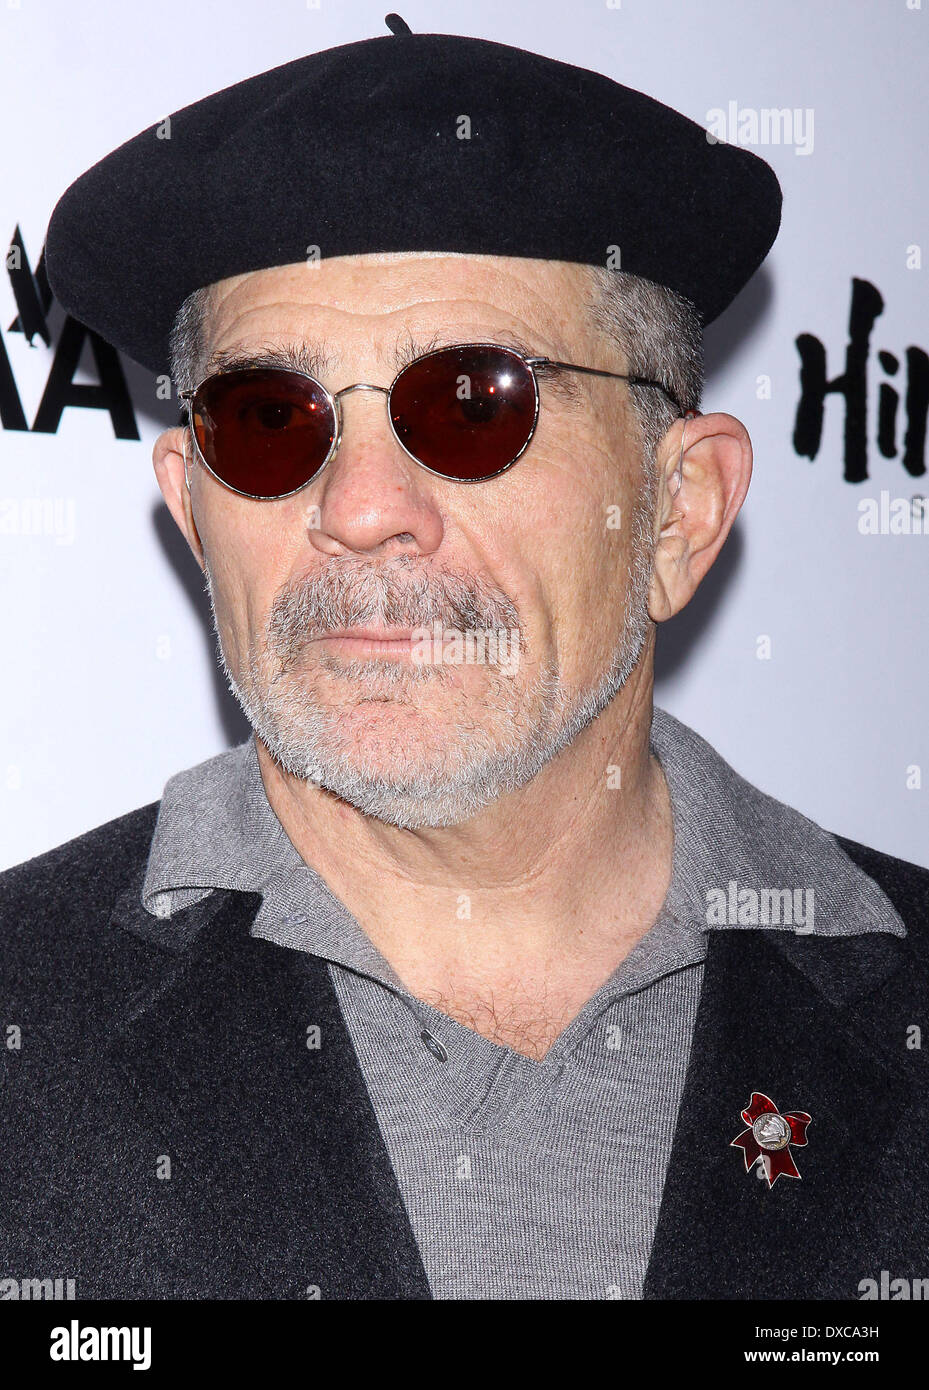 David Mamet at the Broadway opening night of 'The Anarchist' at the Golden Theatre - Arrivals. Featuring: David Mamet at the Br Stock Photo